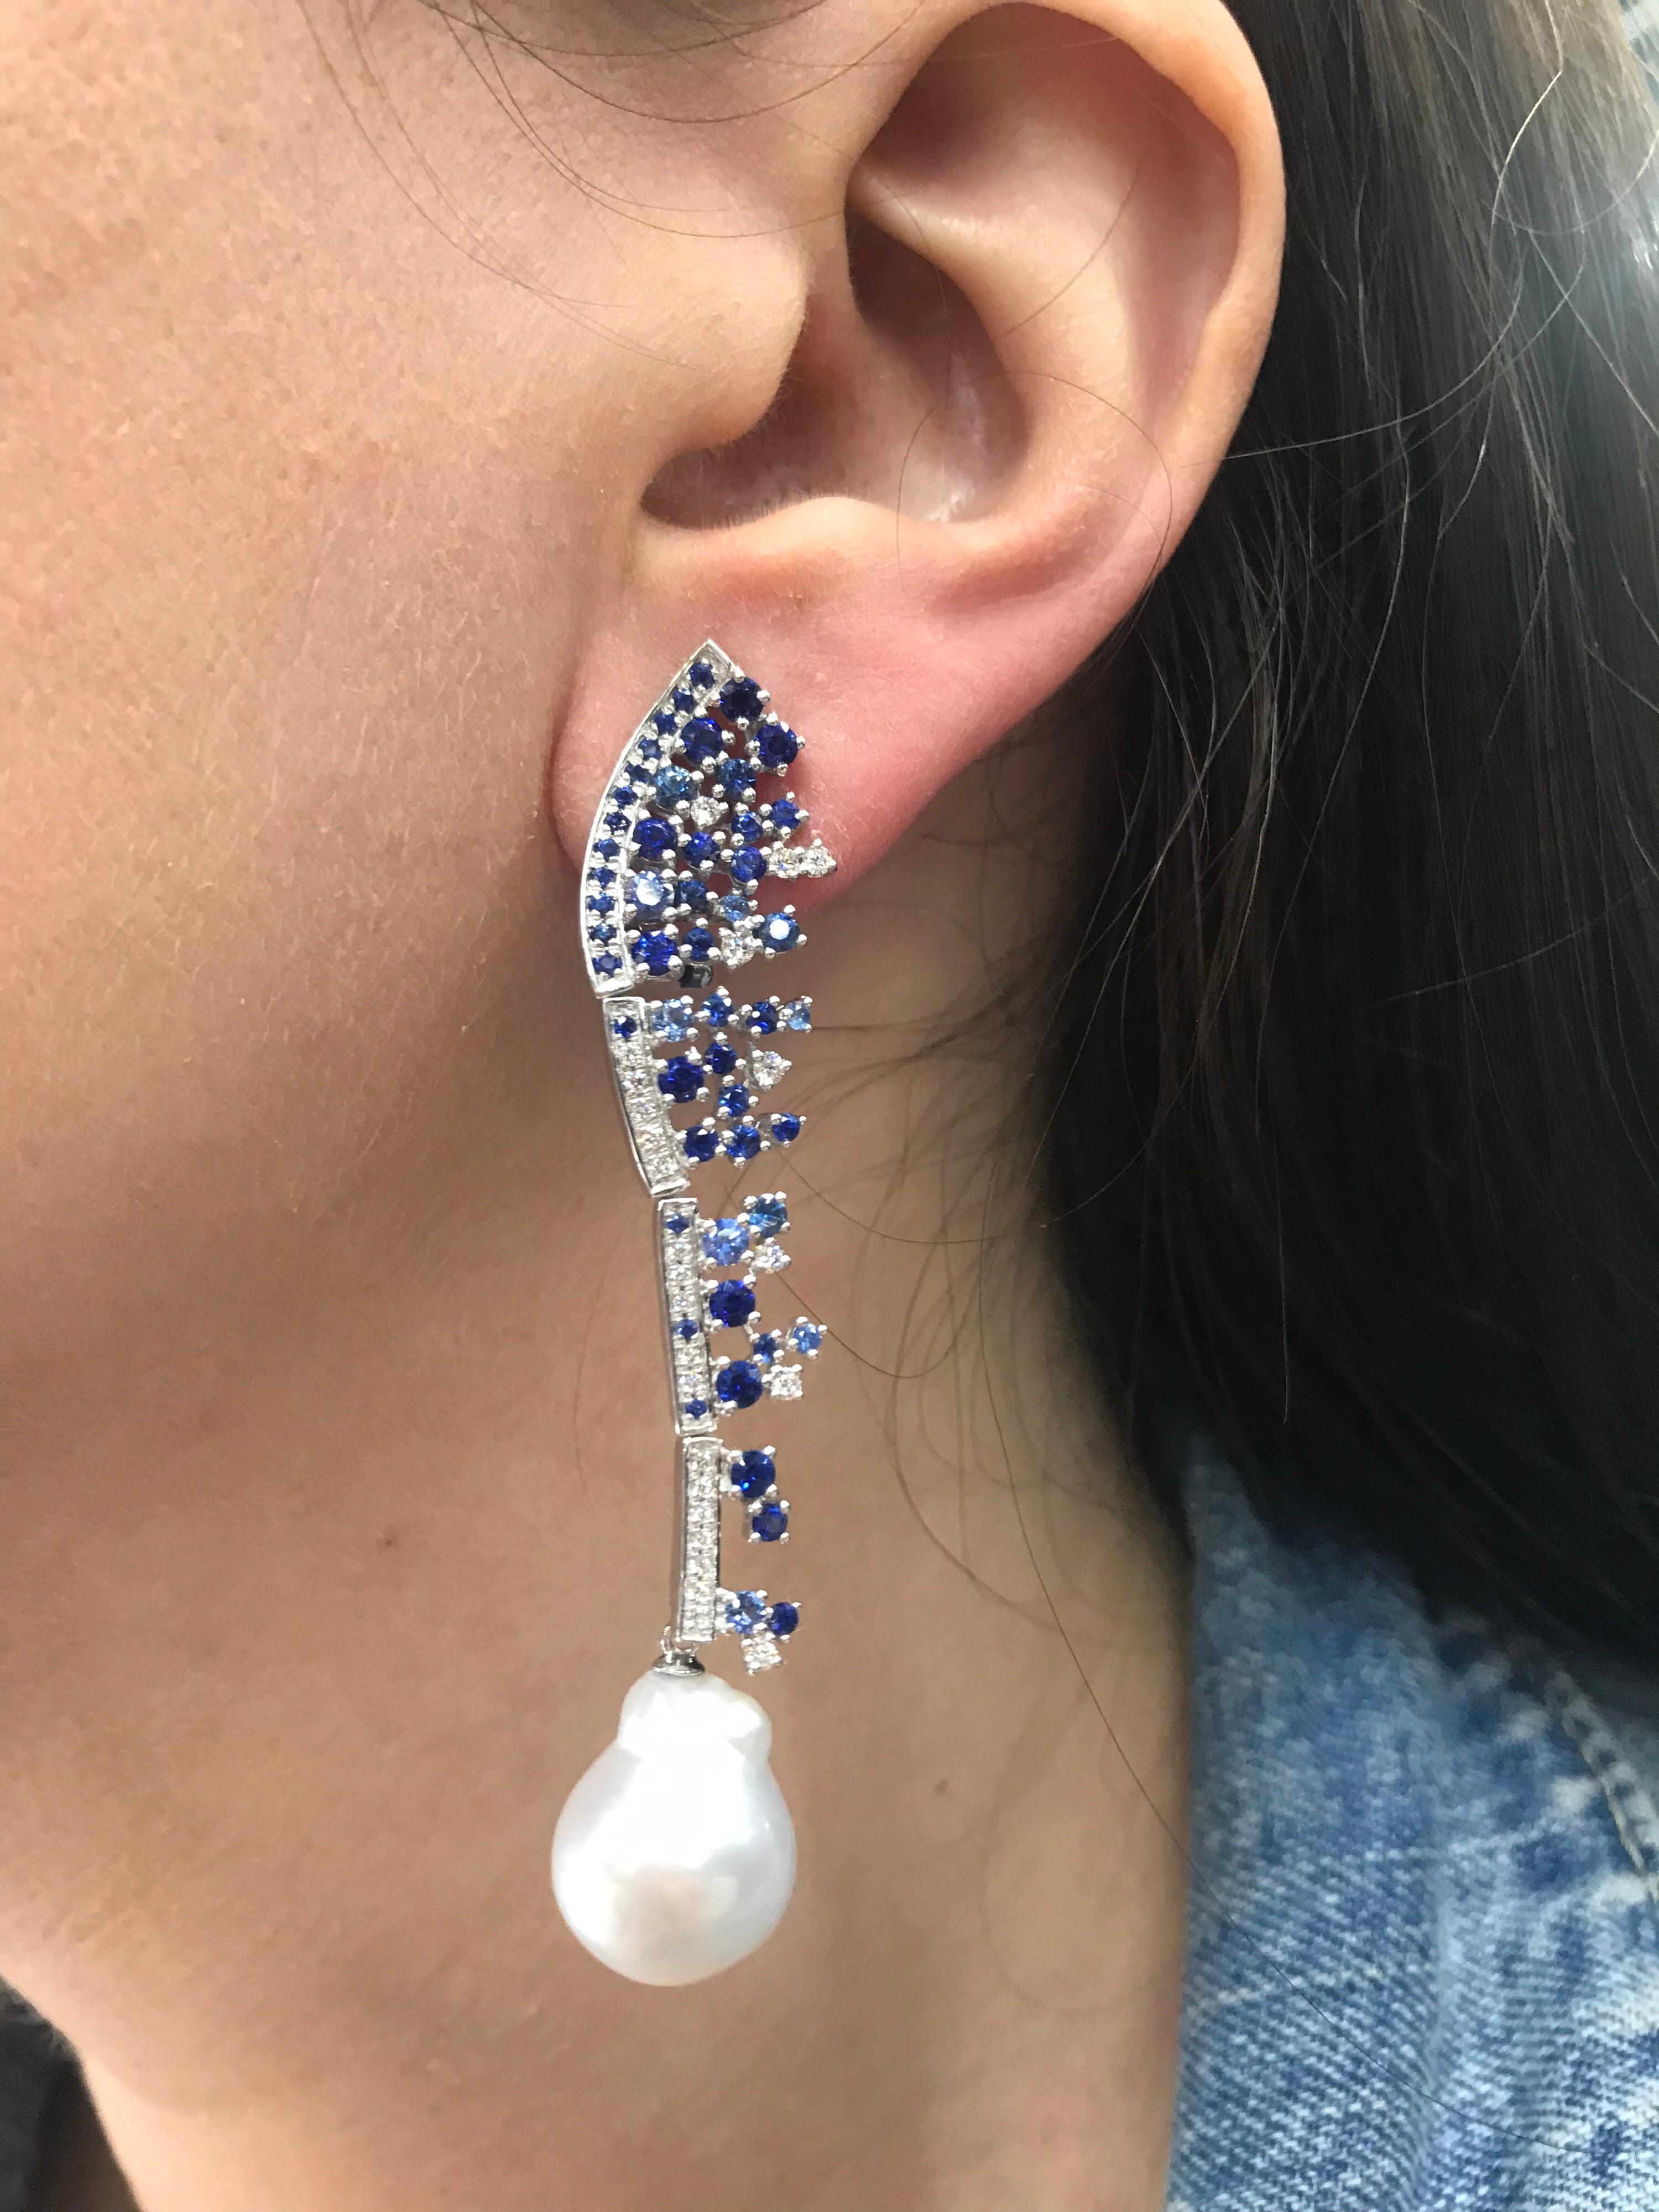 18K White gold drop earrings featuring 104 blue Sapphires weighing 3.60 carats, 50 round brilliants weighing 0.50 carats and two South Sea Baroque Pearls measuring 12-13 mm. 